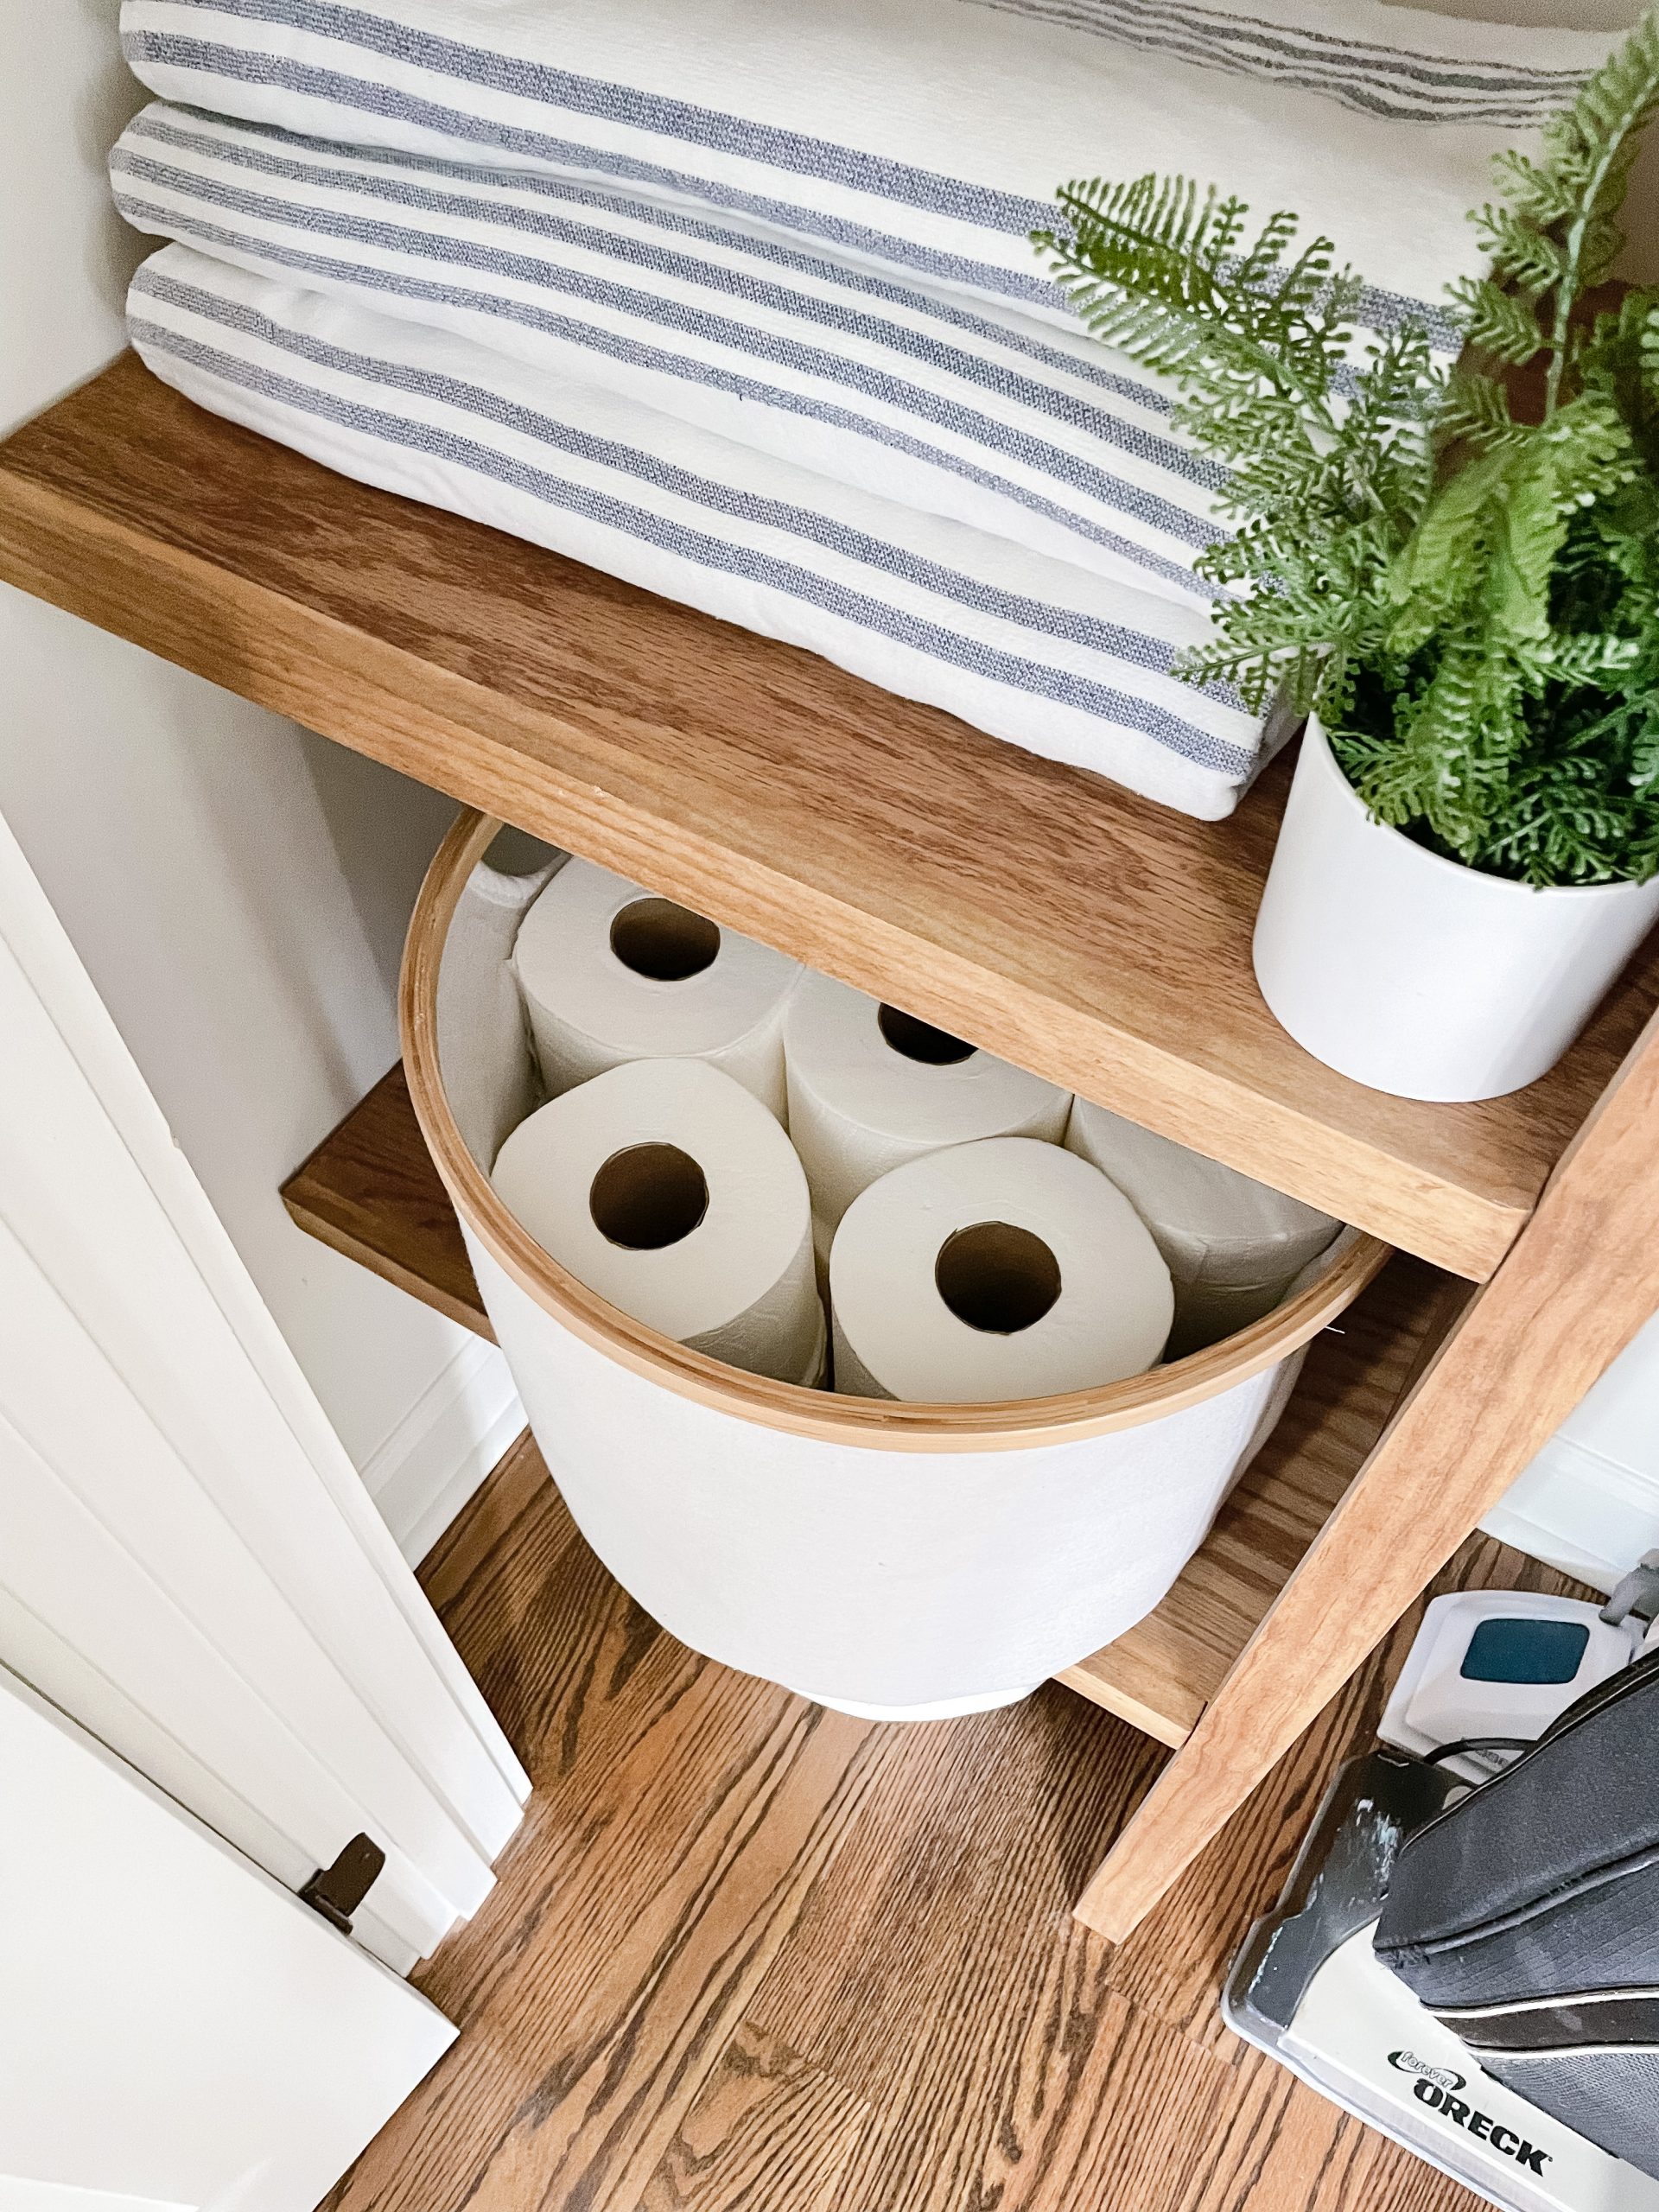 bin of toilet paper on wood shelf and blue and white stripe towel and plant on another shelf. 